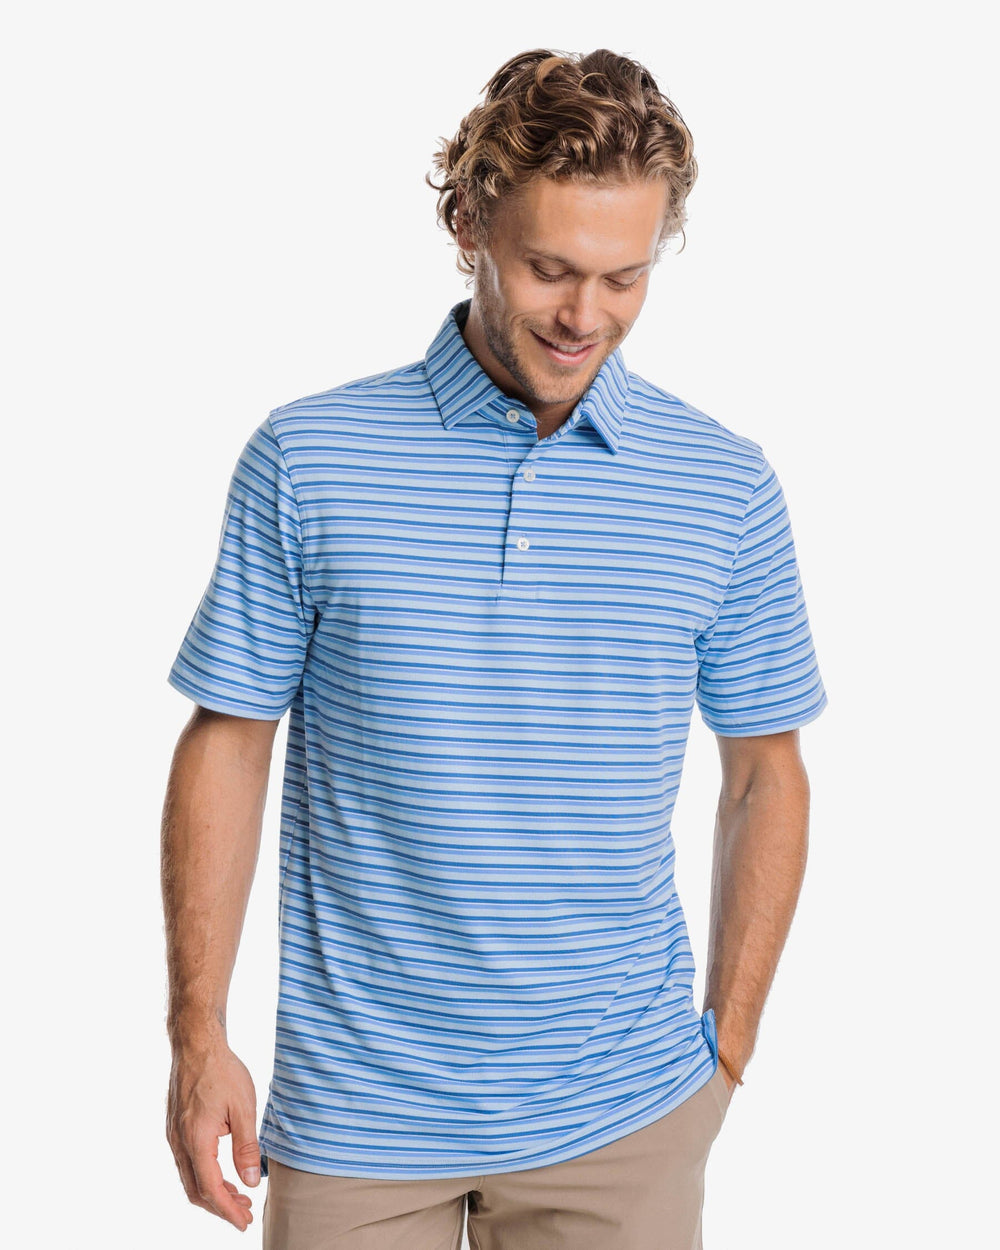 The front view of the Southern Tide Ryder Heather Kendrick Performance Polo Shirt by Southern Tide - Heather Rain Water